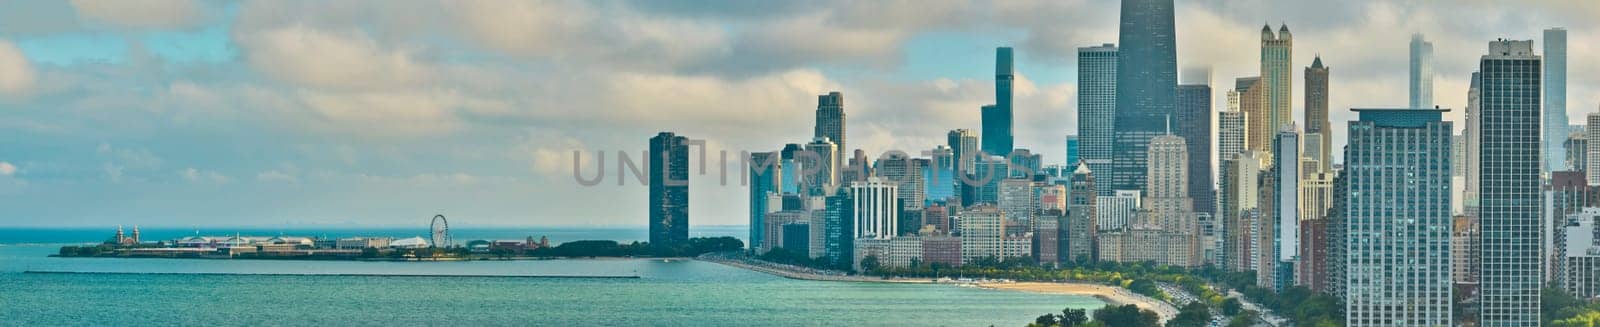 Aerial Chicago Skyline and Lake Michigan Waterfront Panorama by njproductions